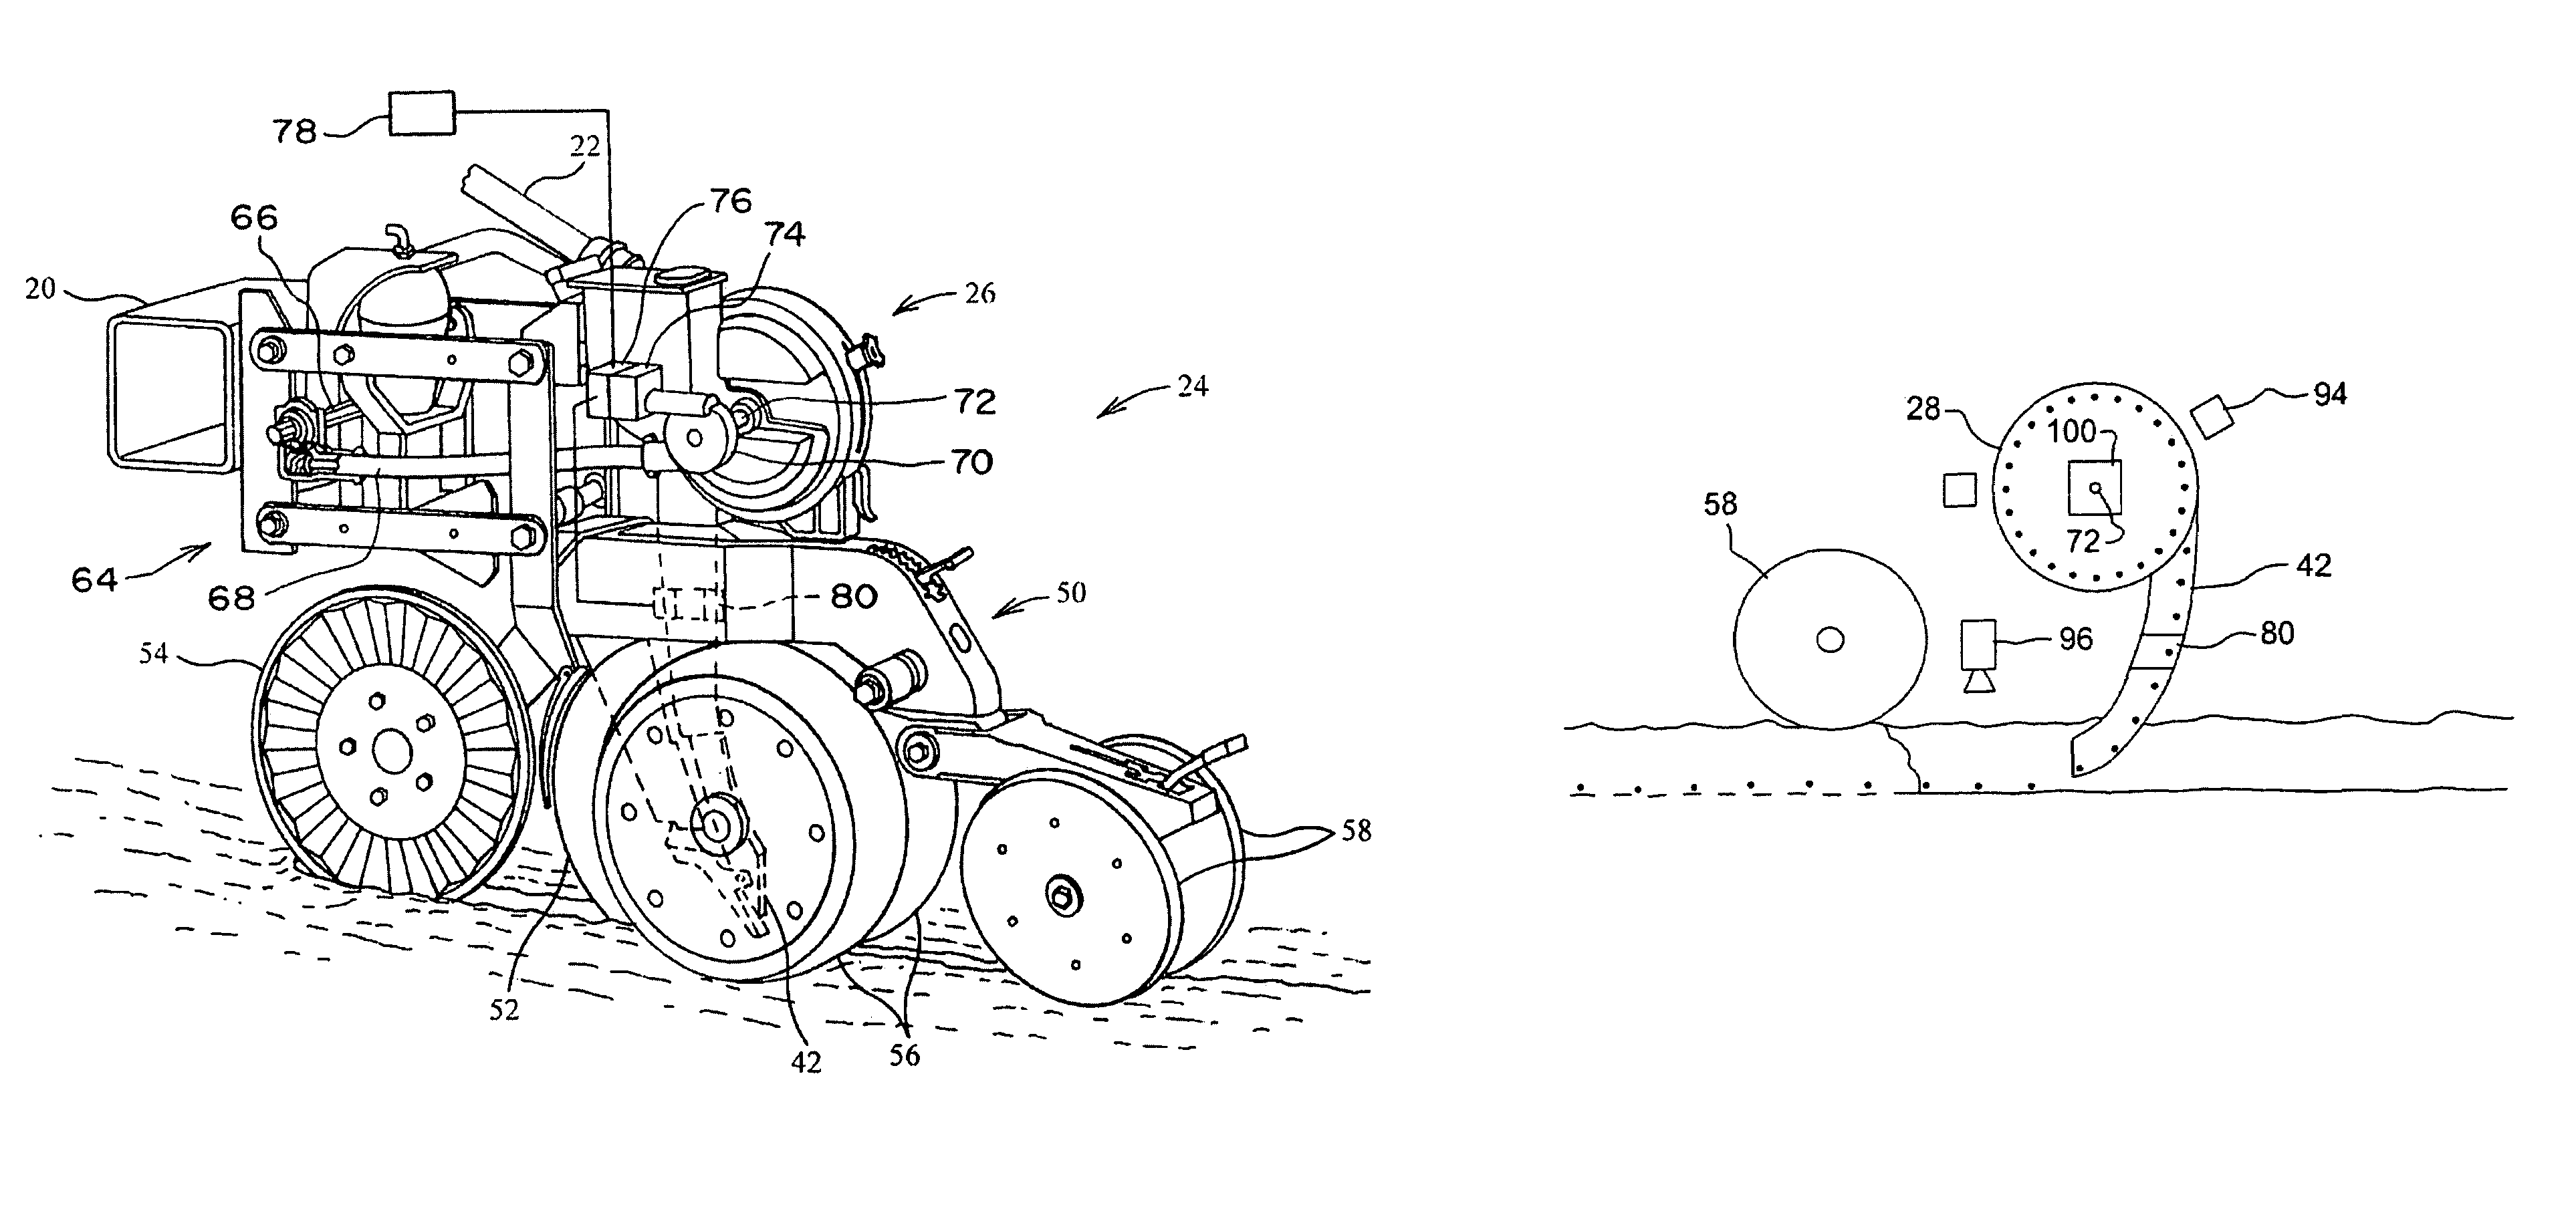 Agricultural seeding apparatus and method for seed placement synchronization between multiple rows